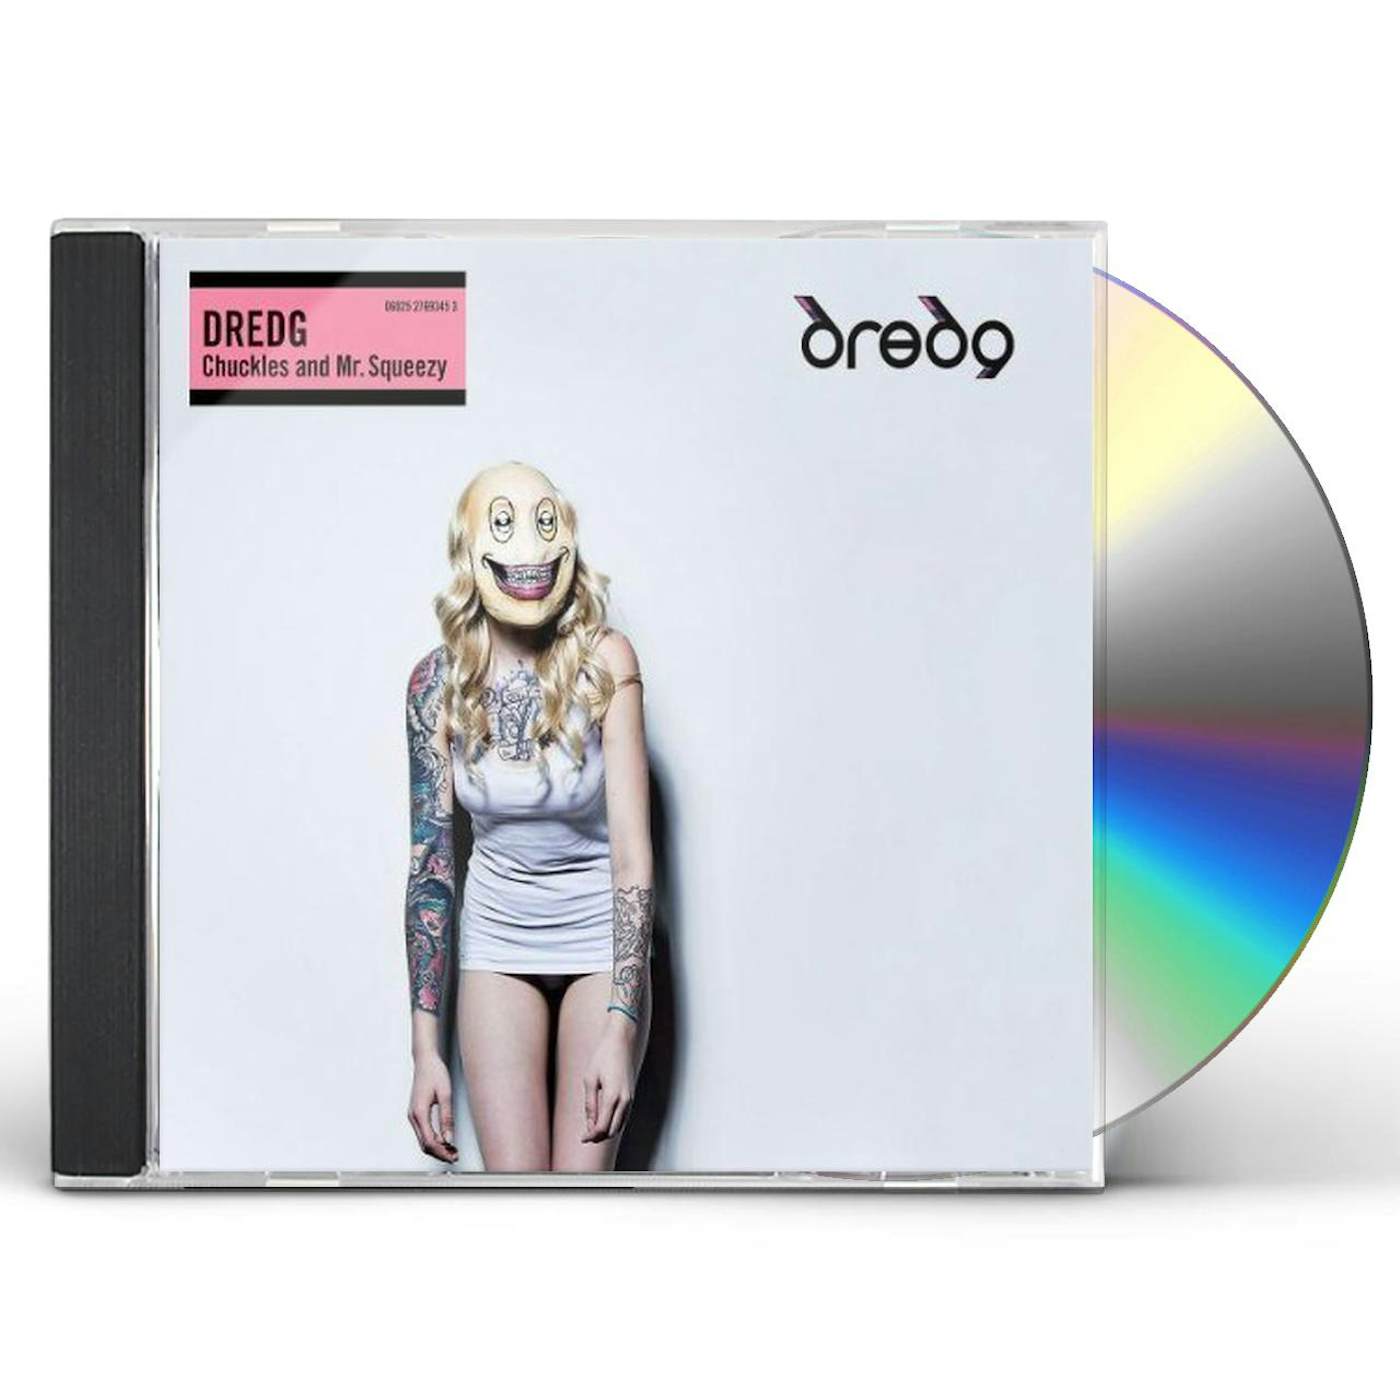 Dredg CHUCKLES & MR. SQUEEZY CD